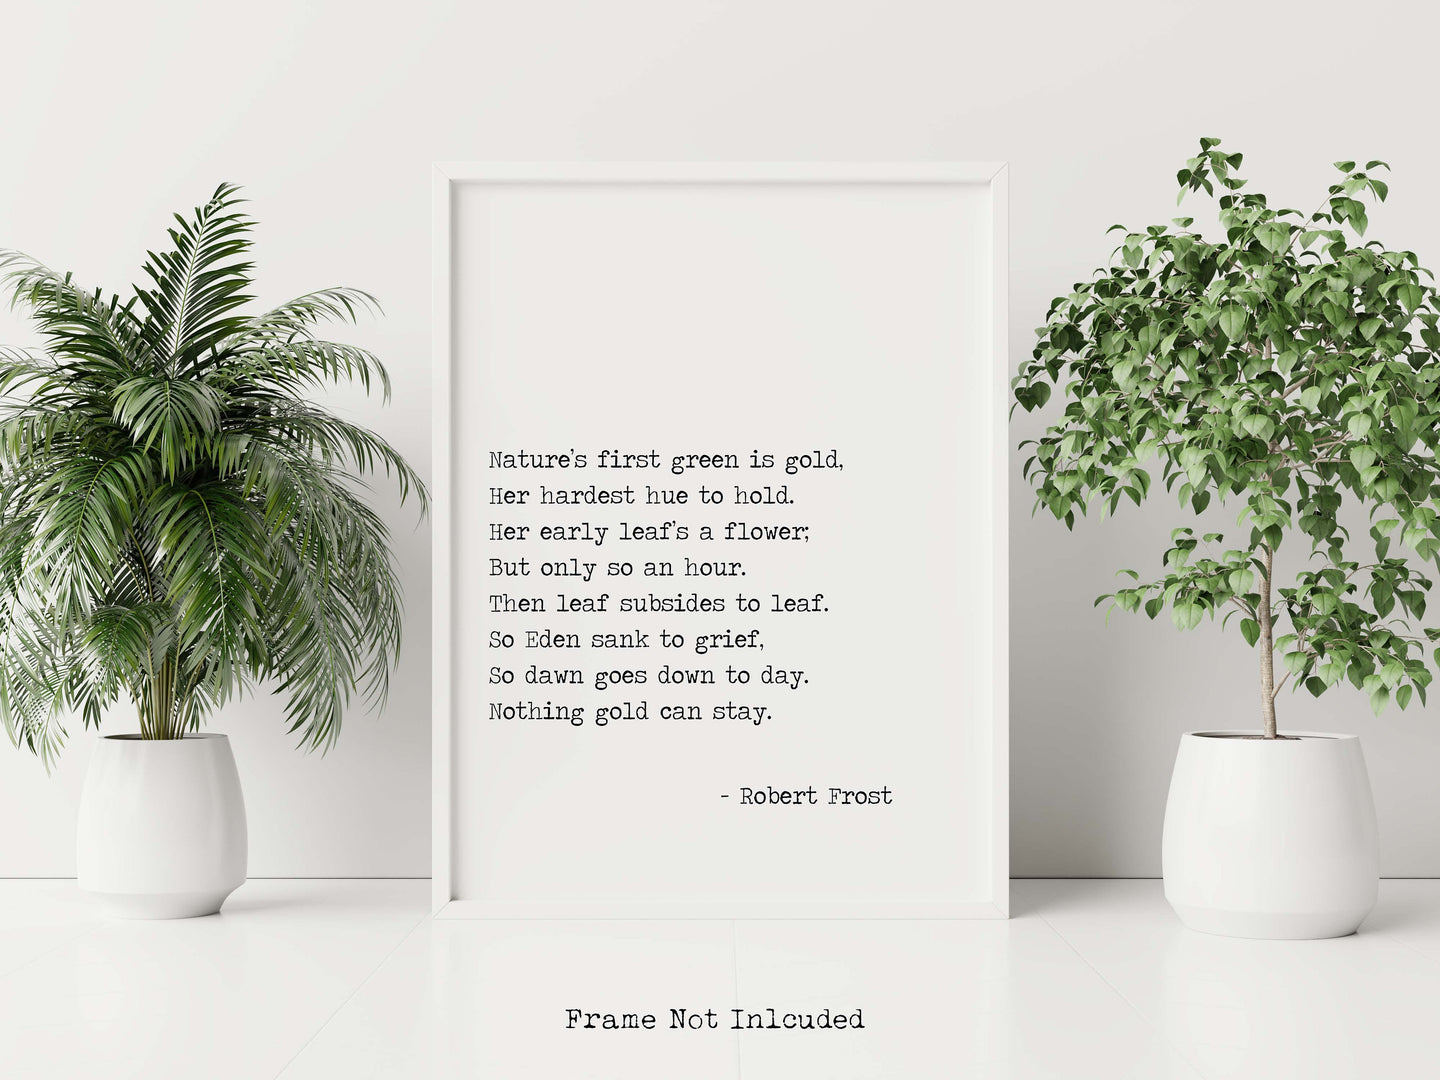 Robert Frost Poem Print Nothing gold can stay - bedroom decor print Robert frost quote Nature's first green is gold Unframed poetry poster